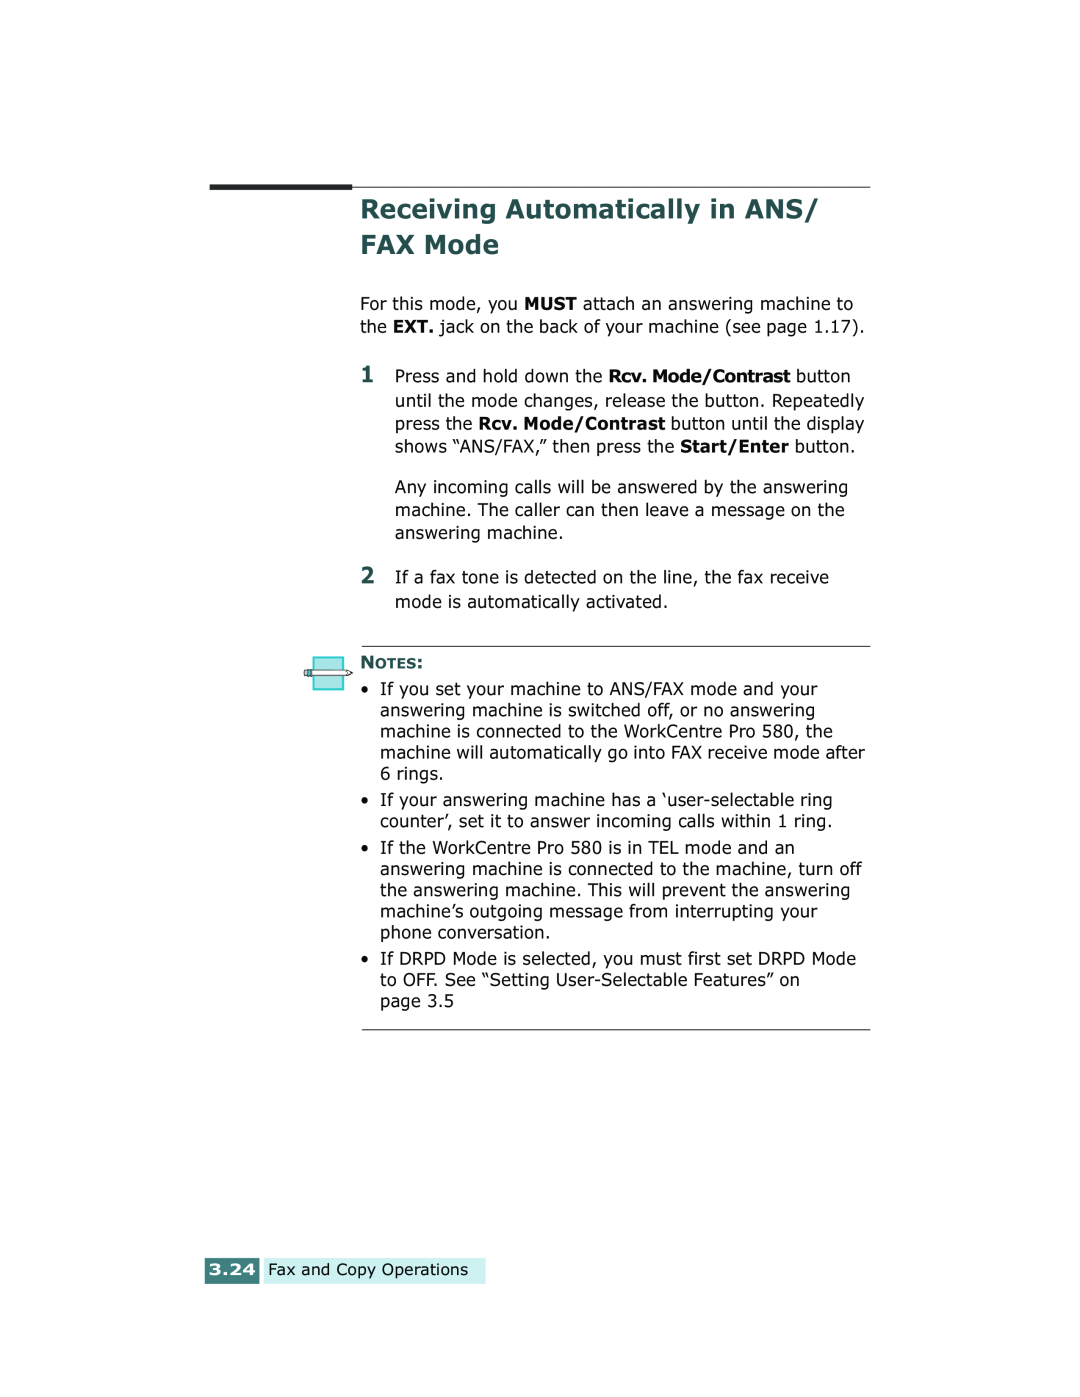 Xerox Pro 580 manual Receiving Automatically in ANS/ FAX Mode 